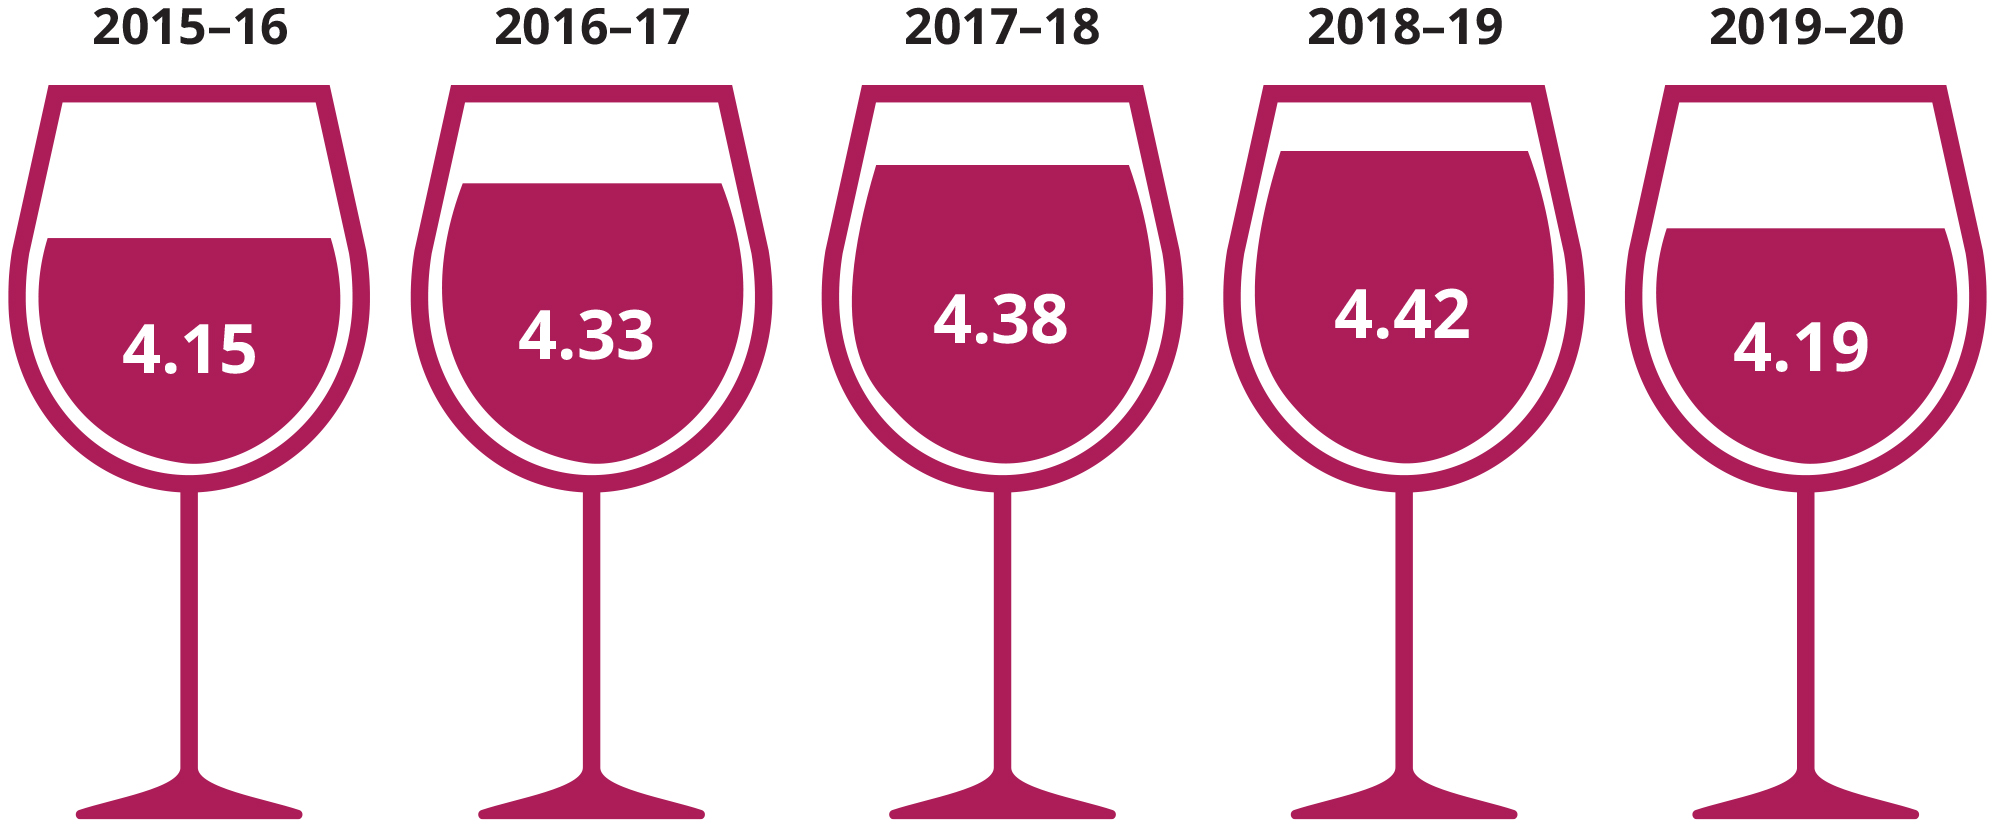 People in Australia consumed 4.19 litres of pure alcohol in the form of wine in 2019–20, a reduction from the highest financial year on record in 2018–19 when 4.42 litres of pure alcohol were consumed per capita. 